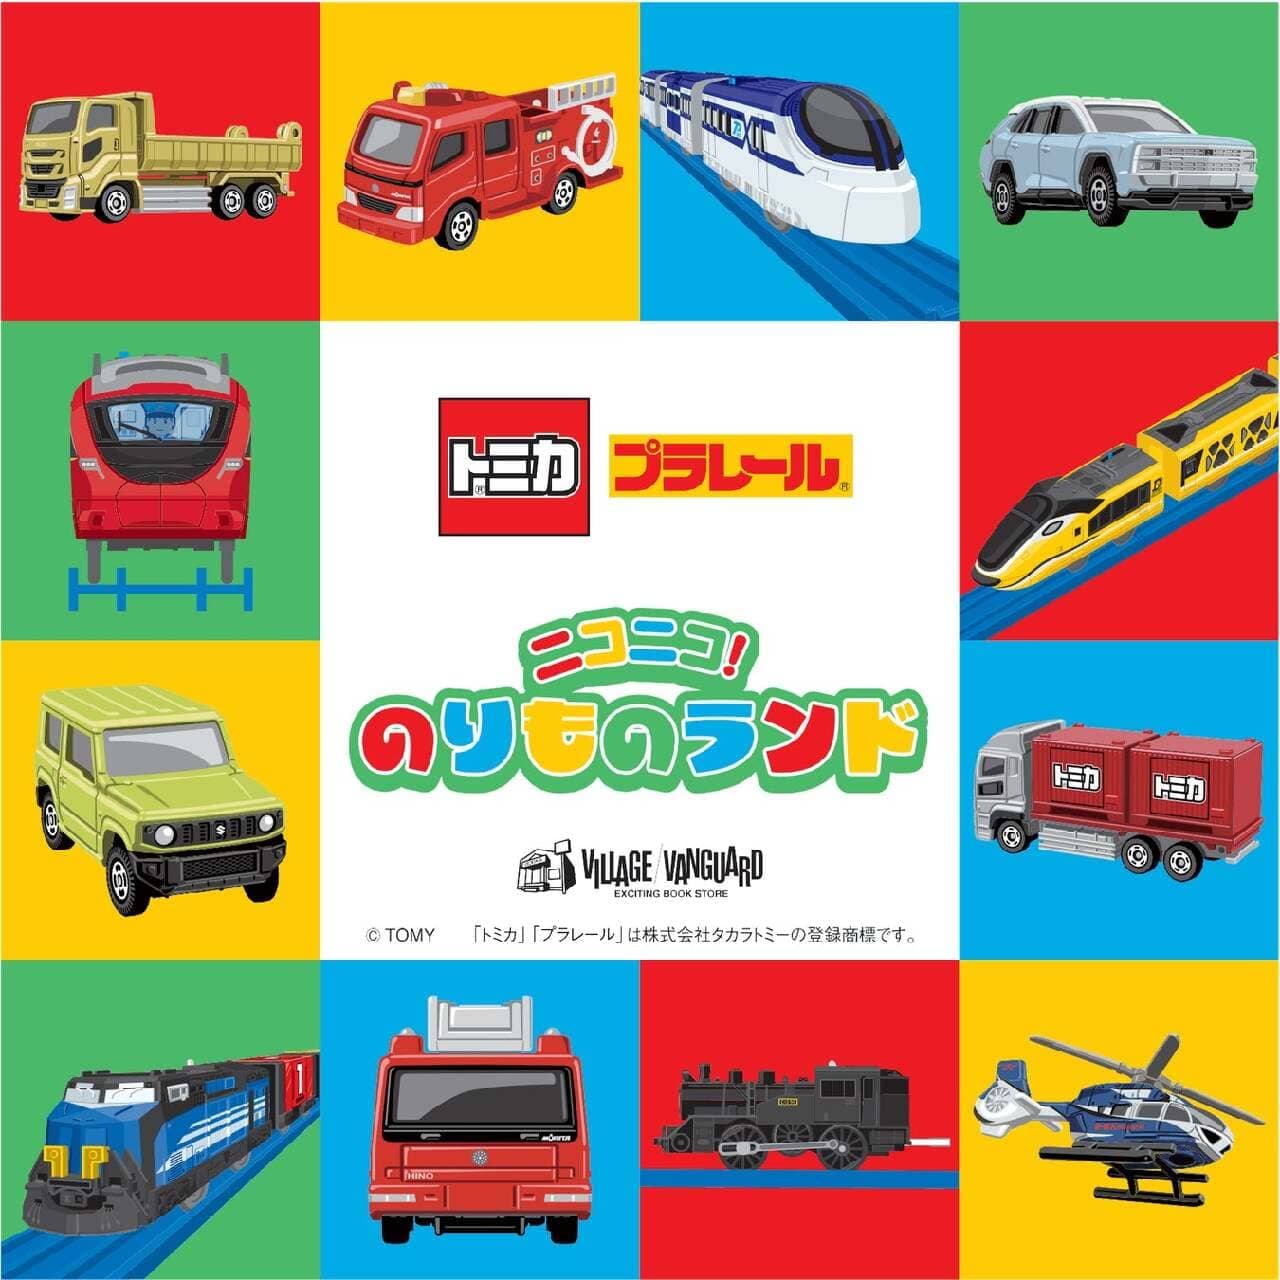 TOMY's Tomica & Plarail Event to be held at AEON MALL Chikushino from June 20 to June 23" Image 1